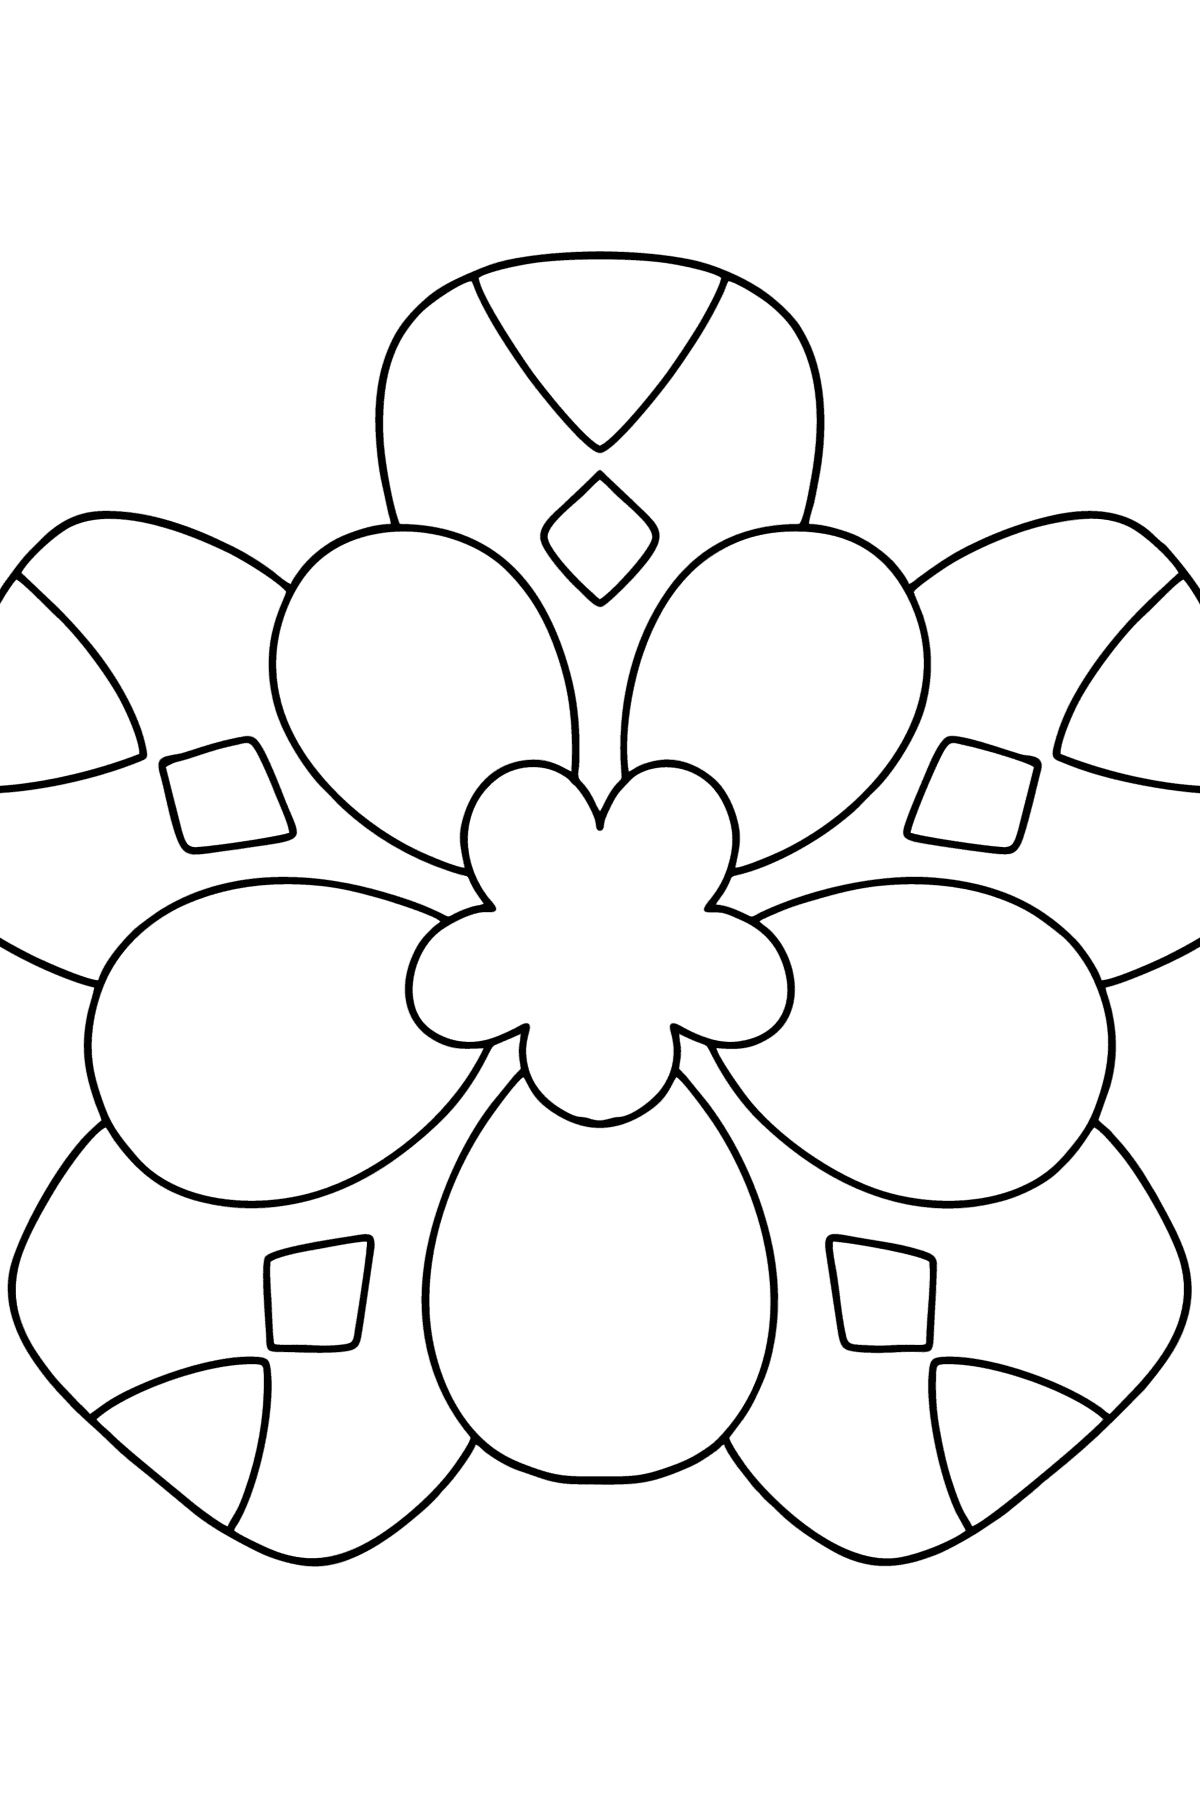 Anti stress Heart coloring page - Coloring Pages for Kids